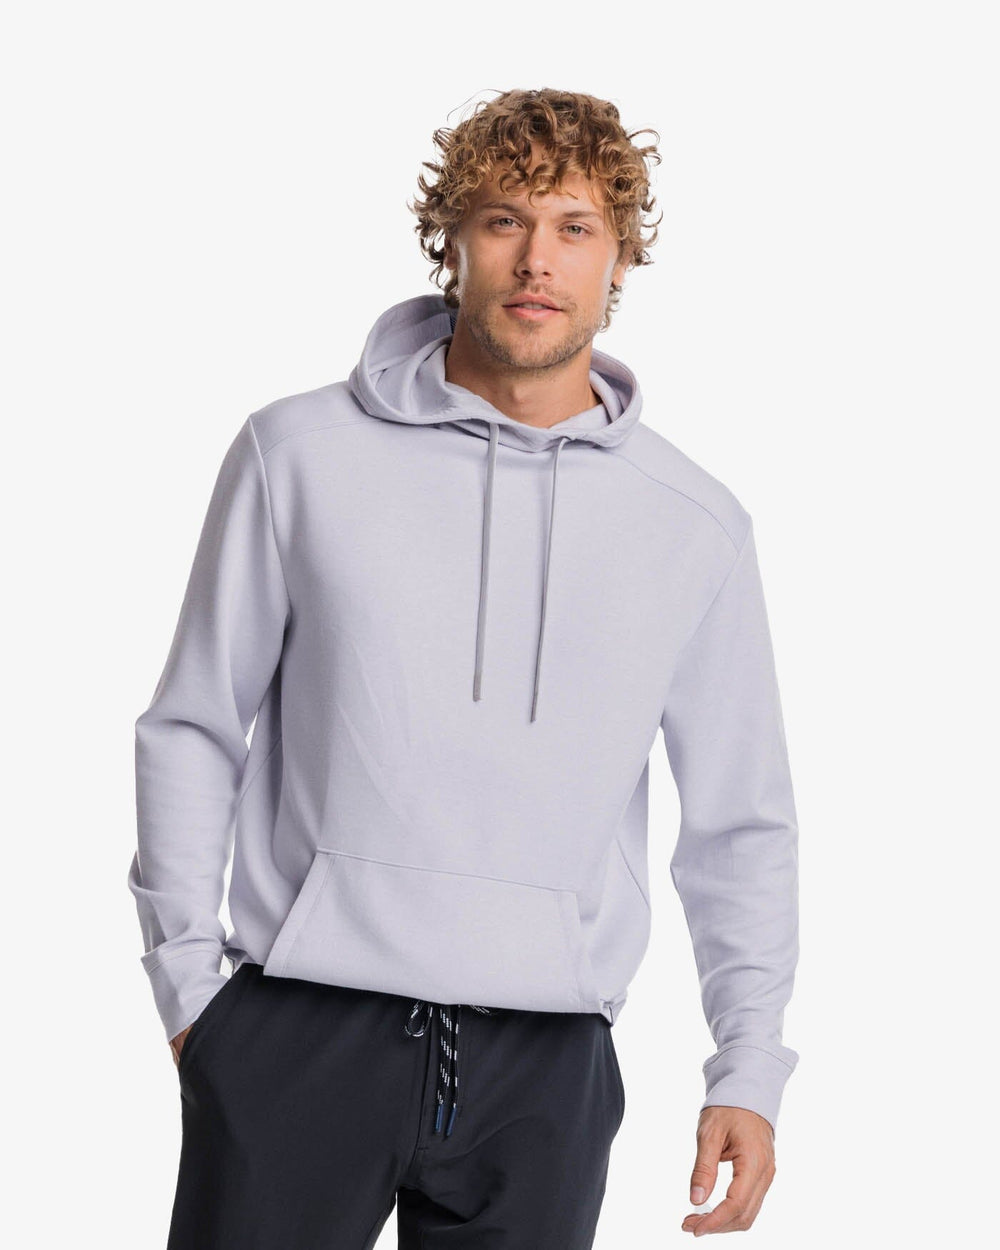 The front view of the Southern Tide Stratford Heather Interlock Hoodie by Southern Tide - Heather Platinum Grey